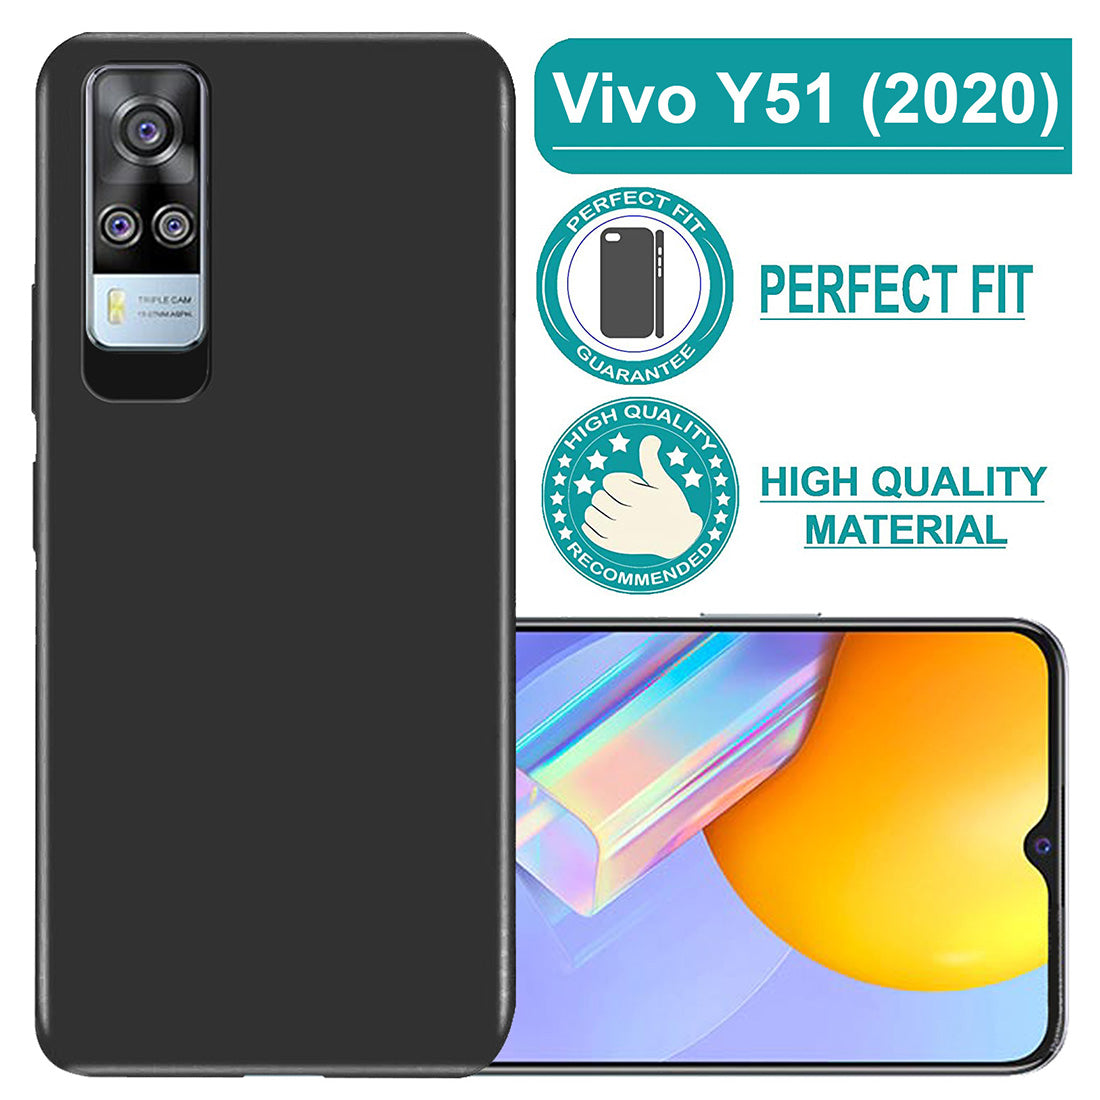 Matte Finish TPU Back Cover for Vivo Y51A / Y51 (2020) / Y31 (2021)